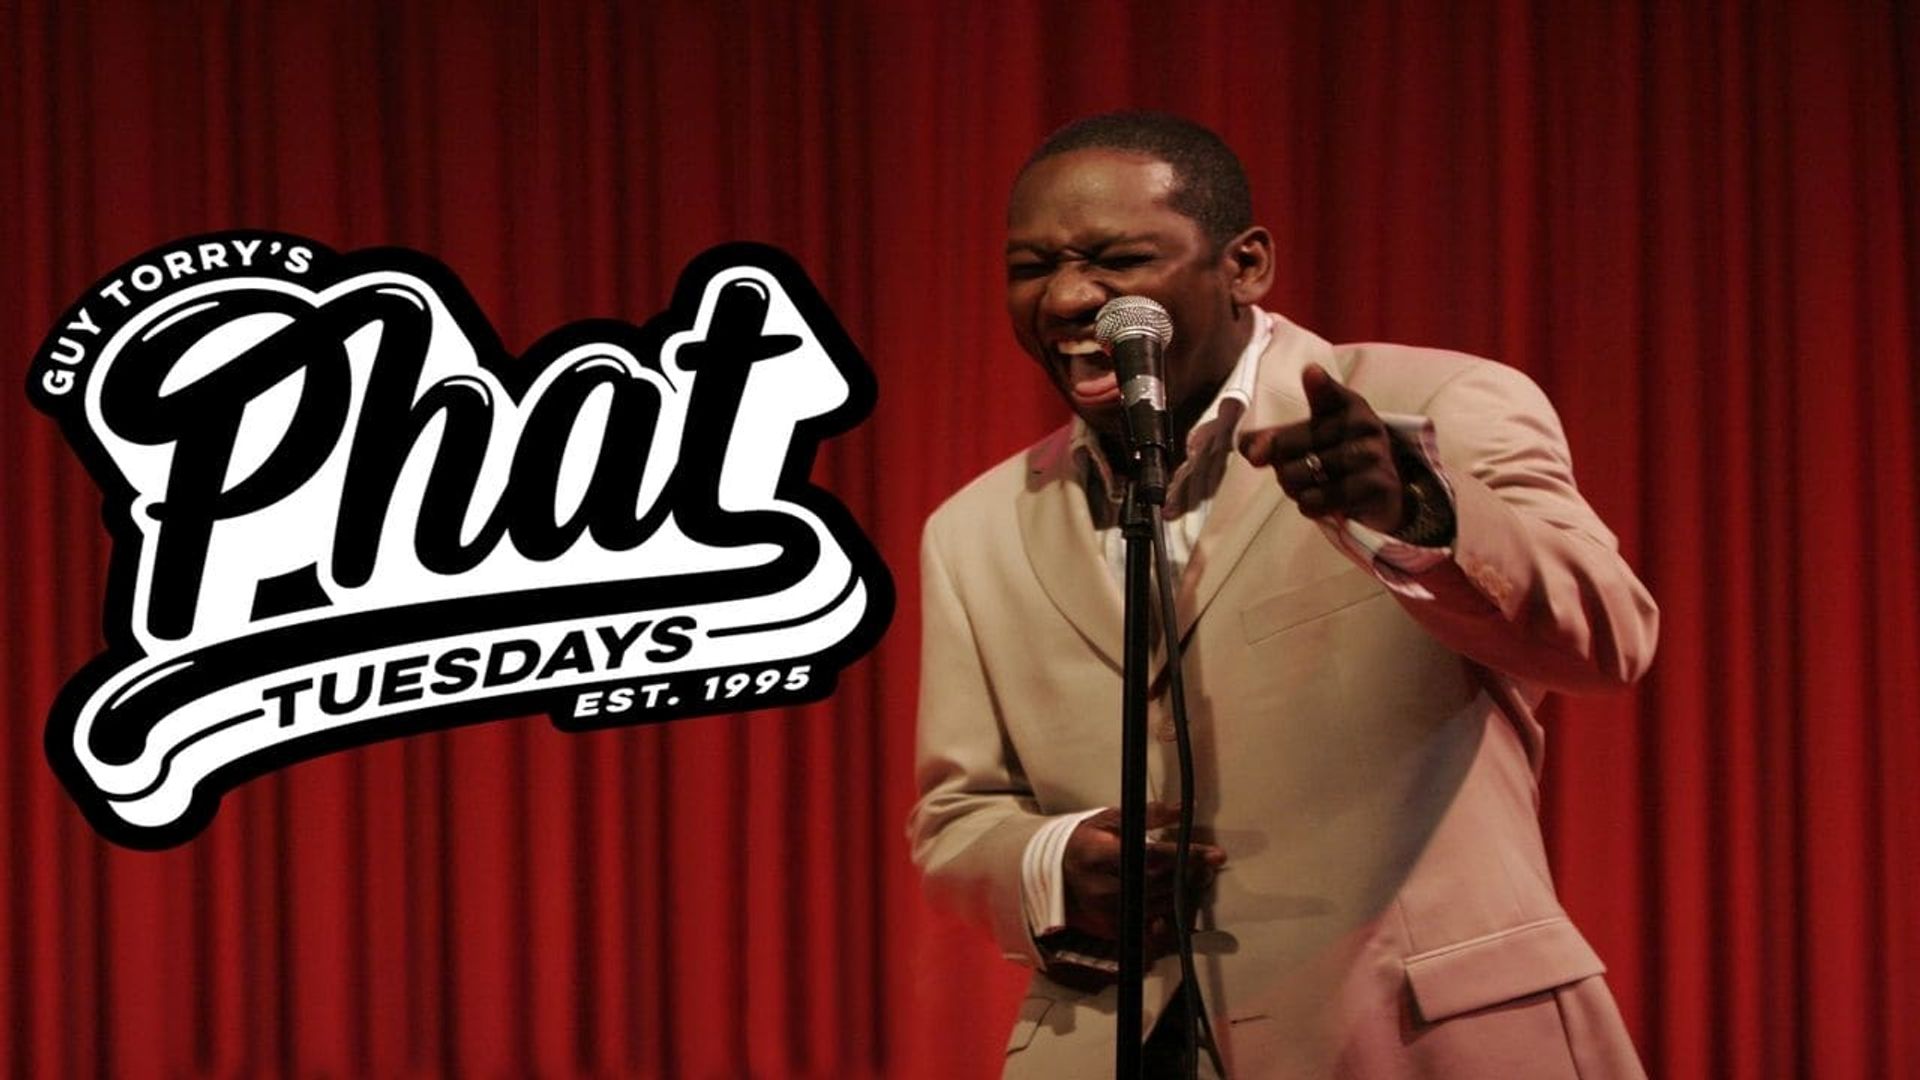 Phat Comedy Tuesdays, Vol. 1 background